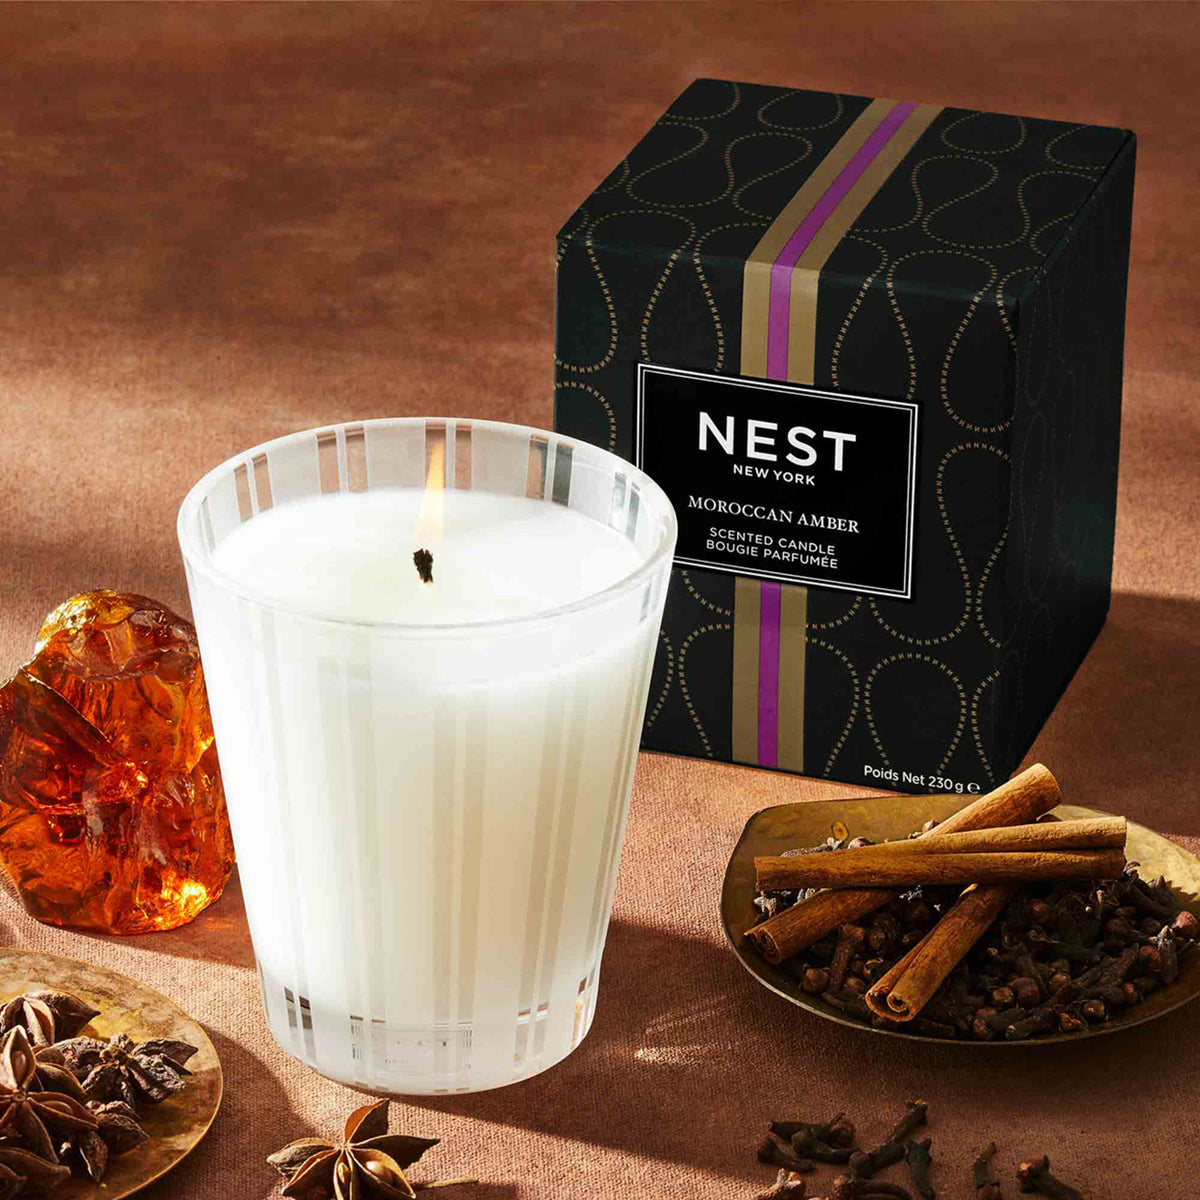 Nest Moroccan Amber Candle .